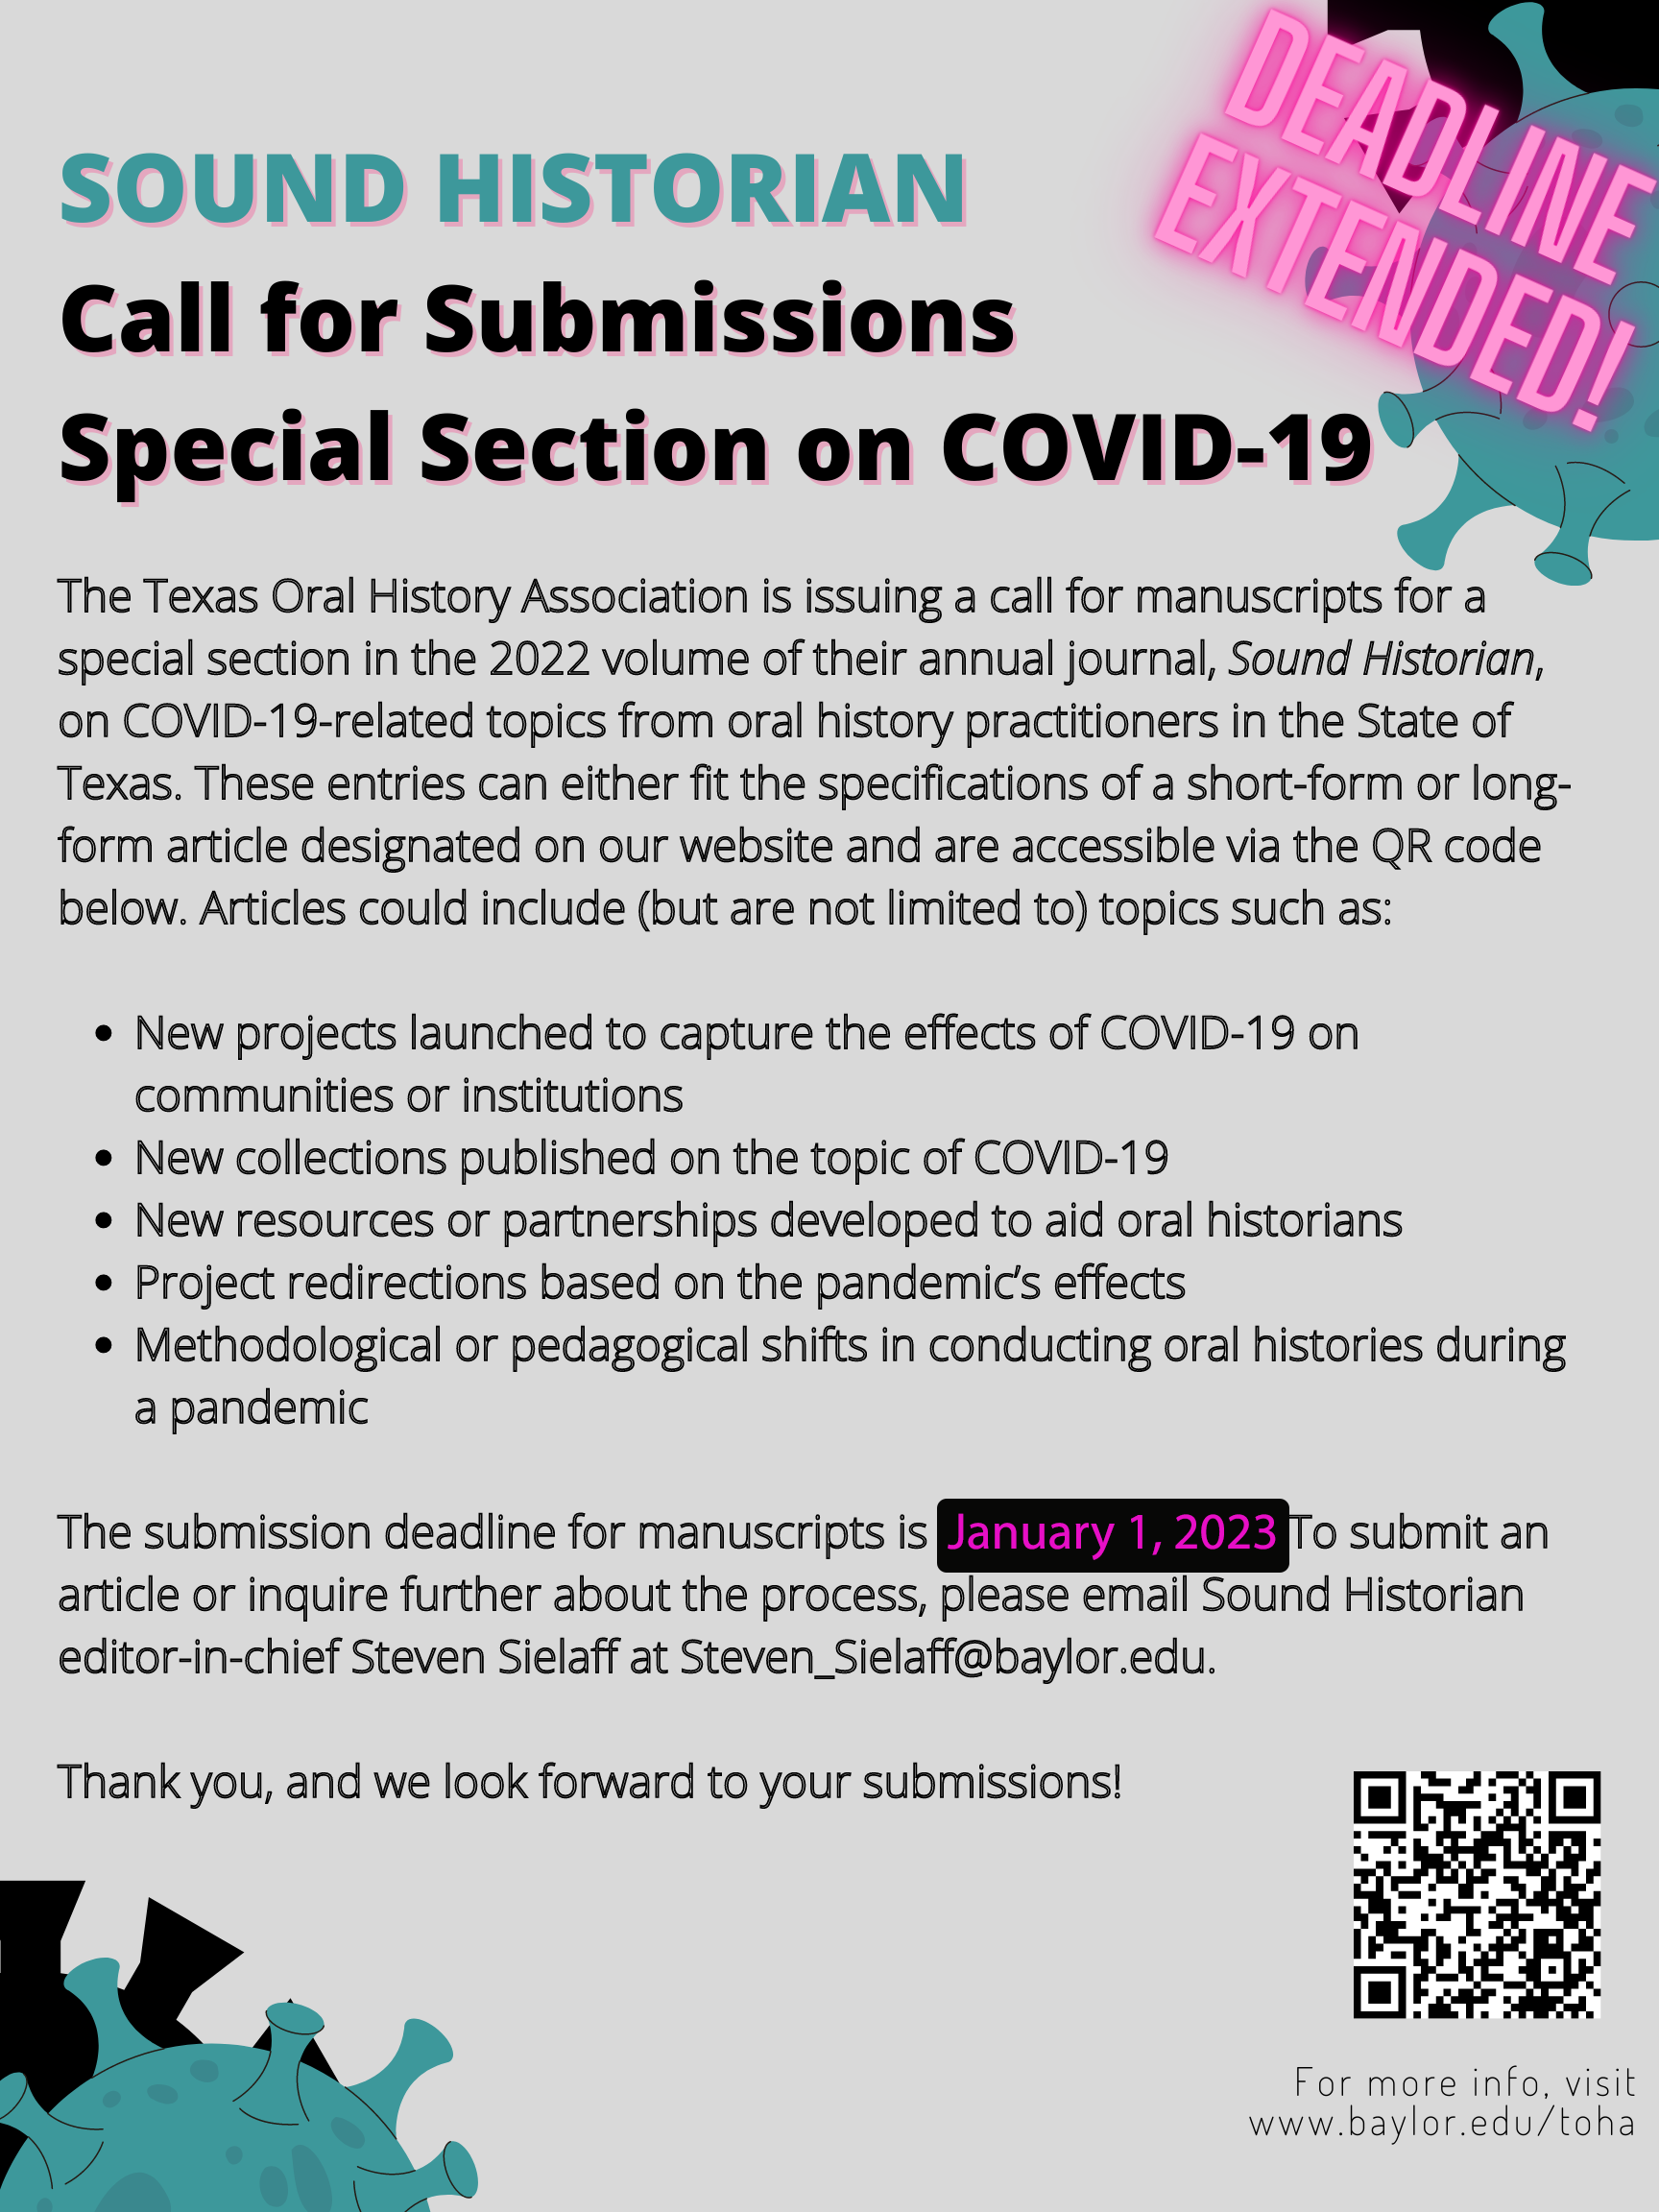 Flyer for Sound Historian Special Section on COVID-19